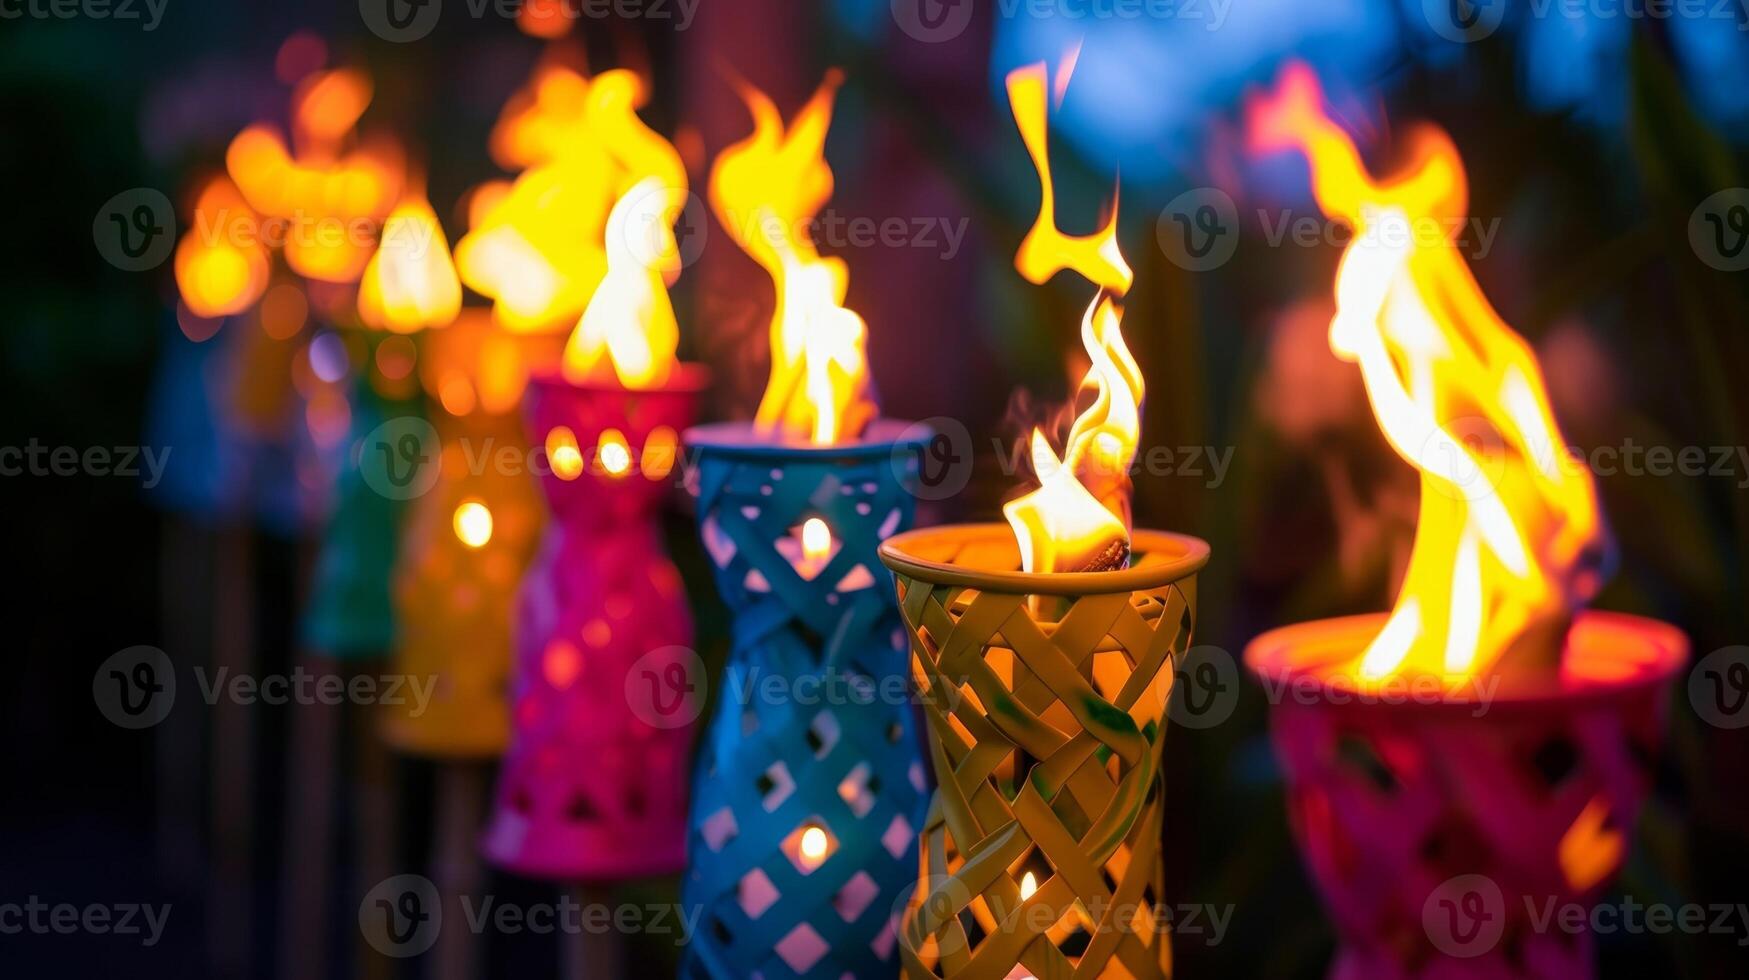 Colorful tiki torches lighting up the night creating a festive and summery vibe photo